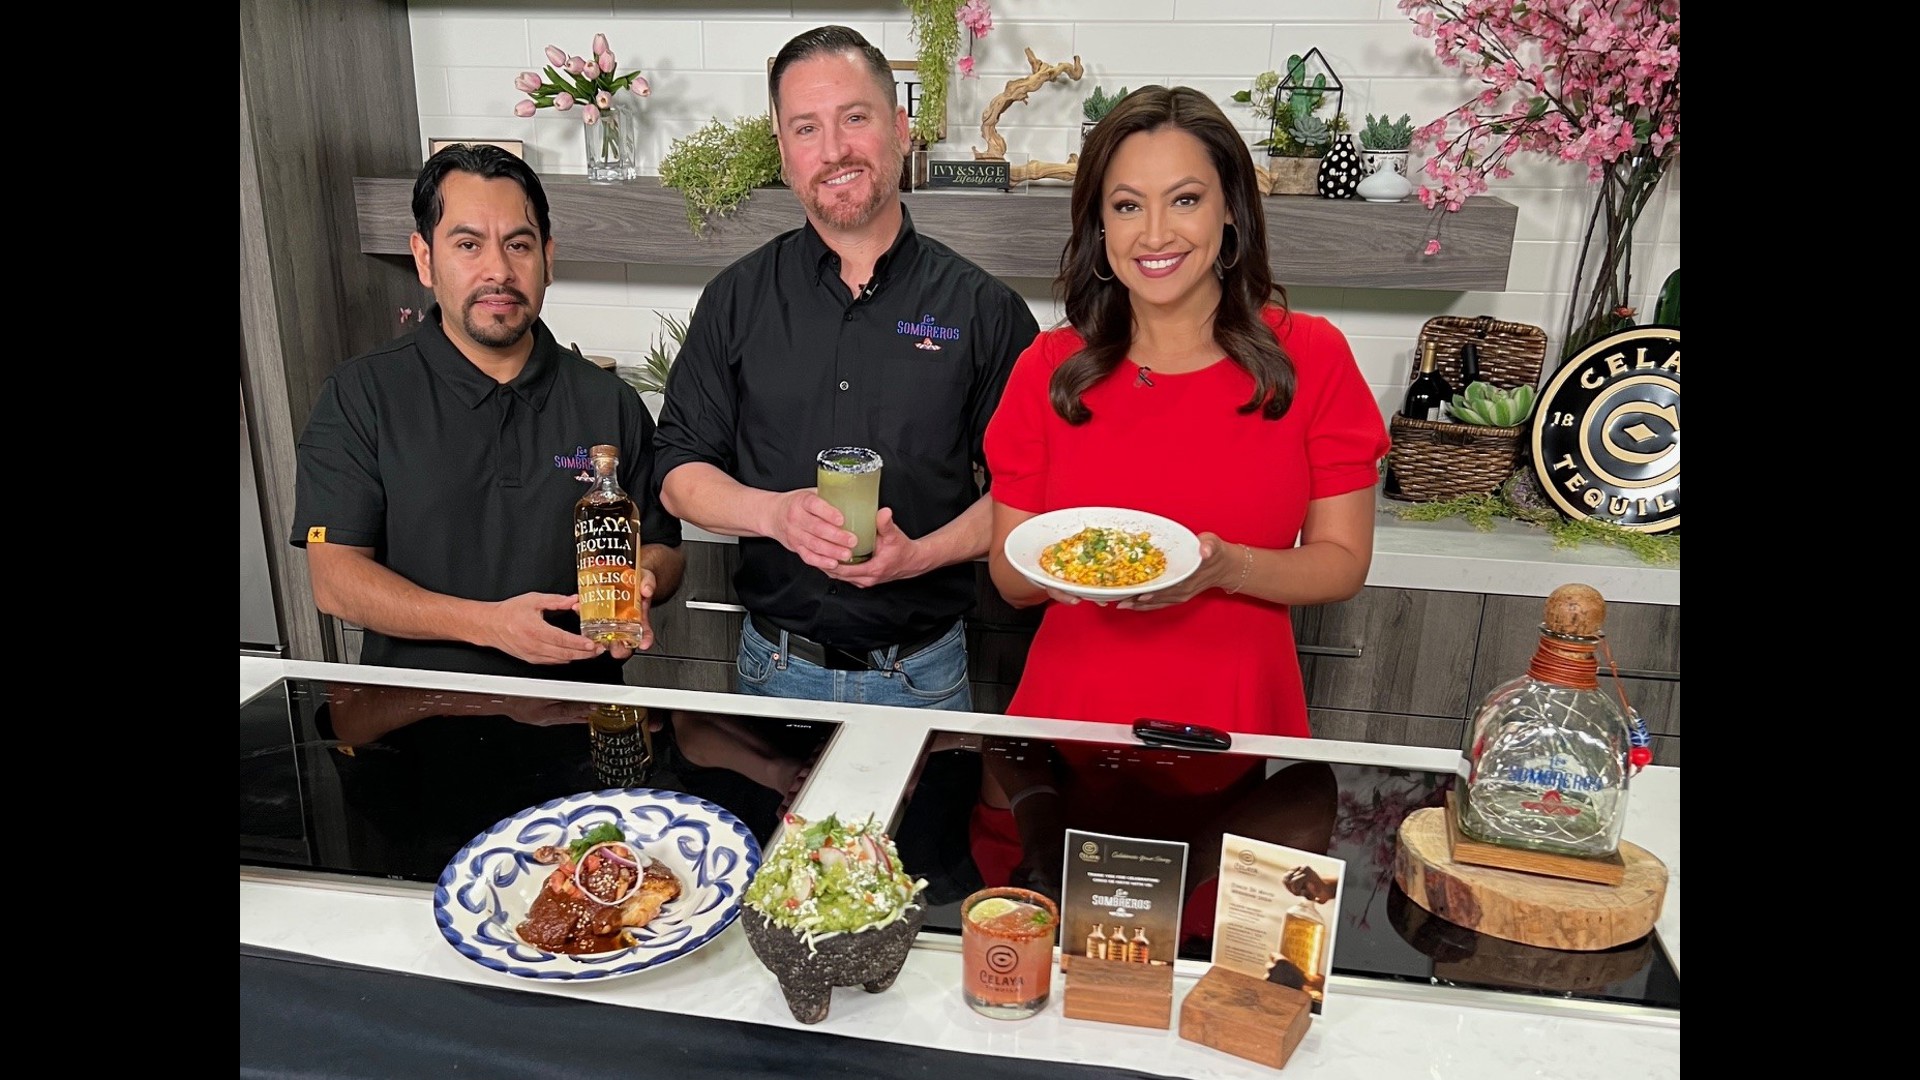 Local Mexican restaurant Los Sombreros shows us how to make a signature dish and shares all the fun plans for the fiesta.